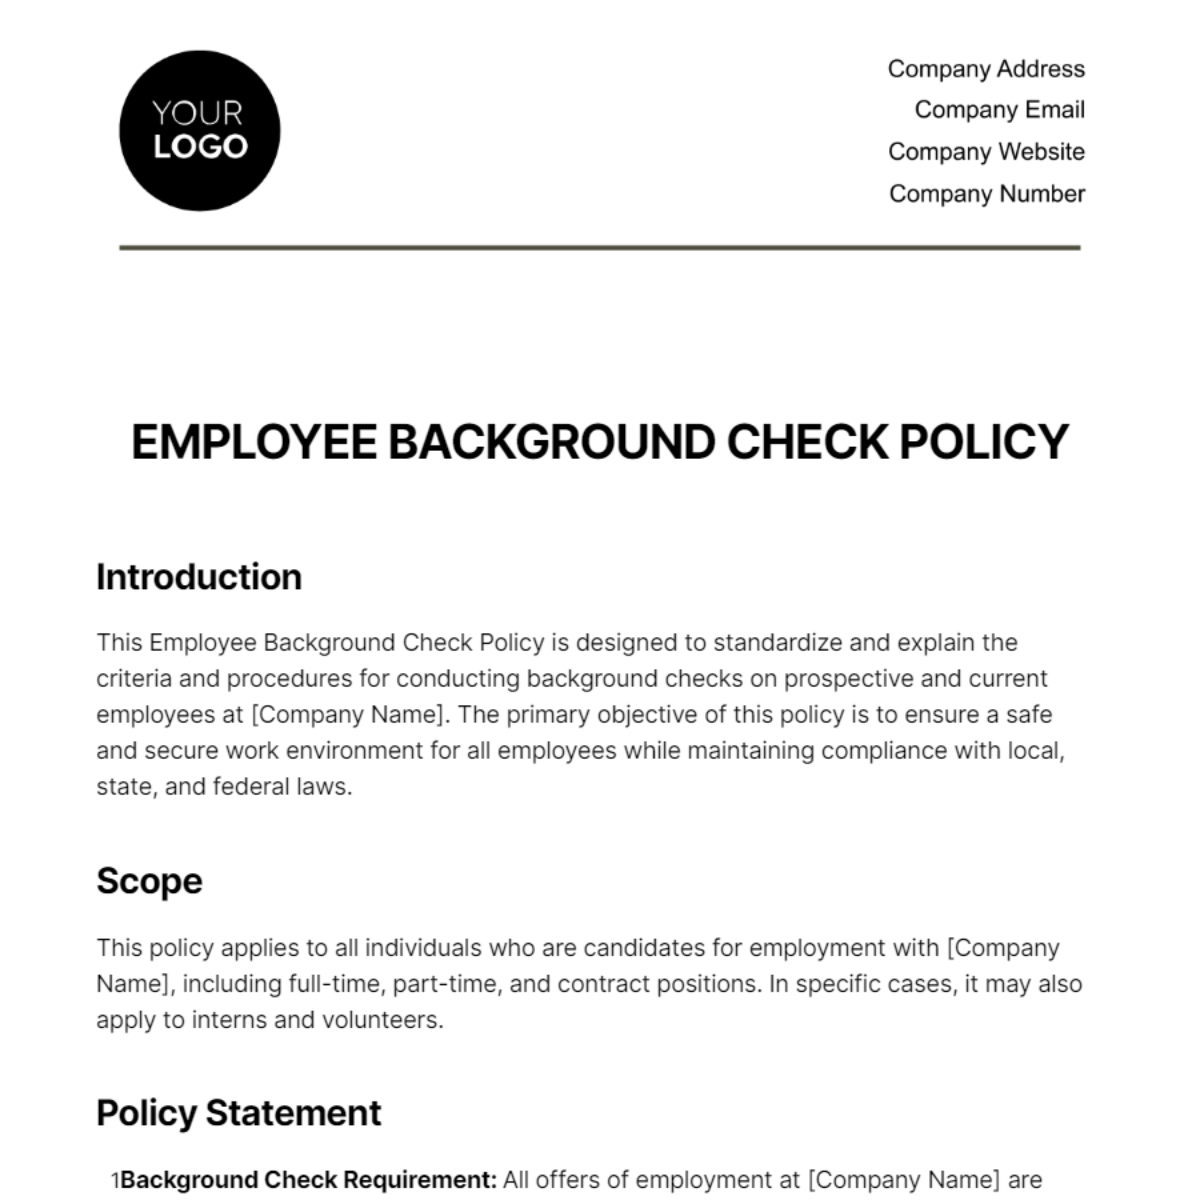 Free Employee Background Check Policy HR Template